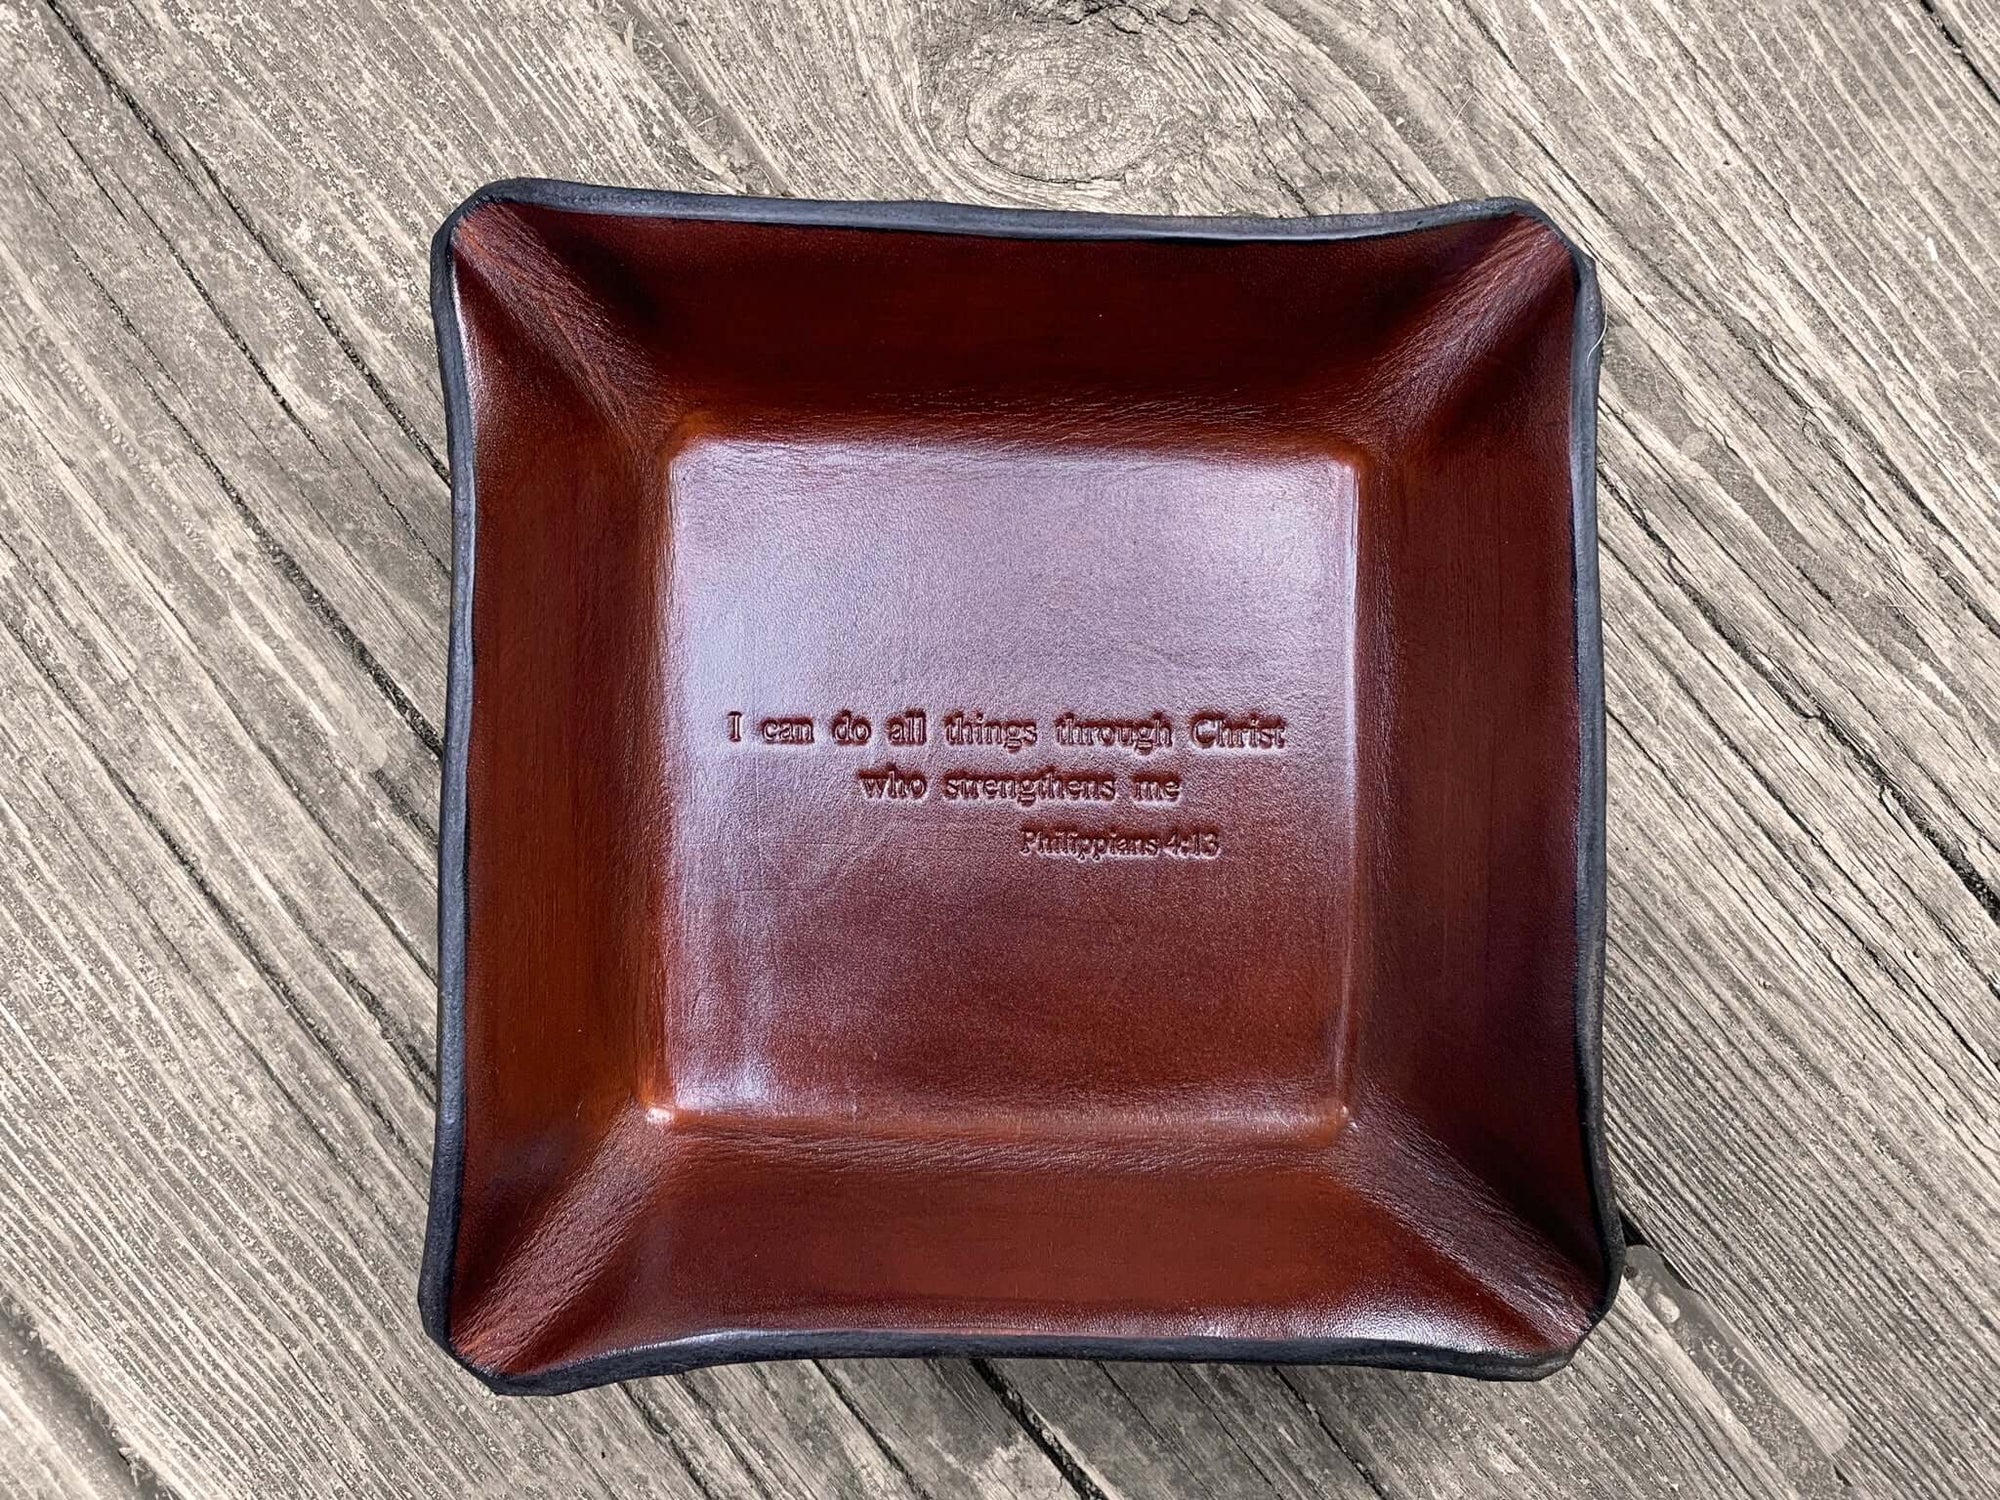 Our Philippians 4:13 Leather Tray is a Great Gift for a Christian Milestone